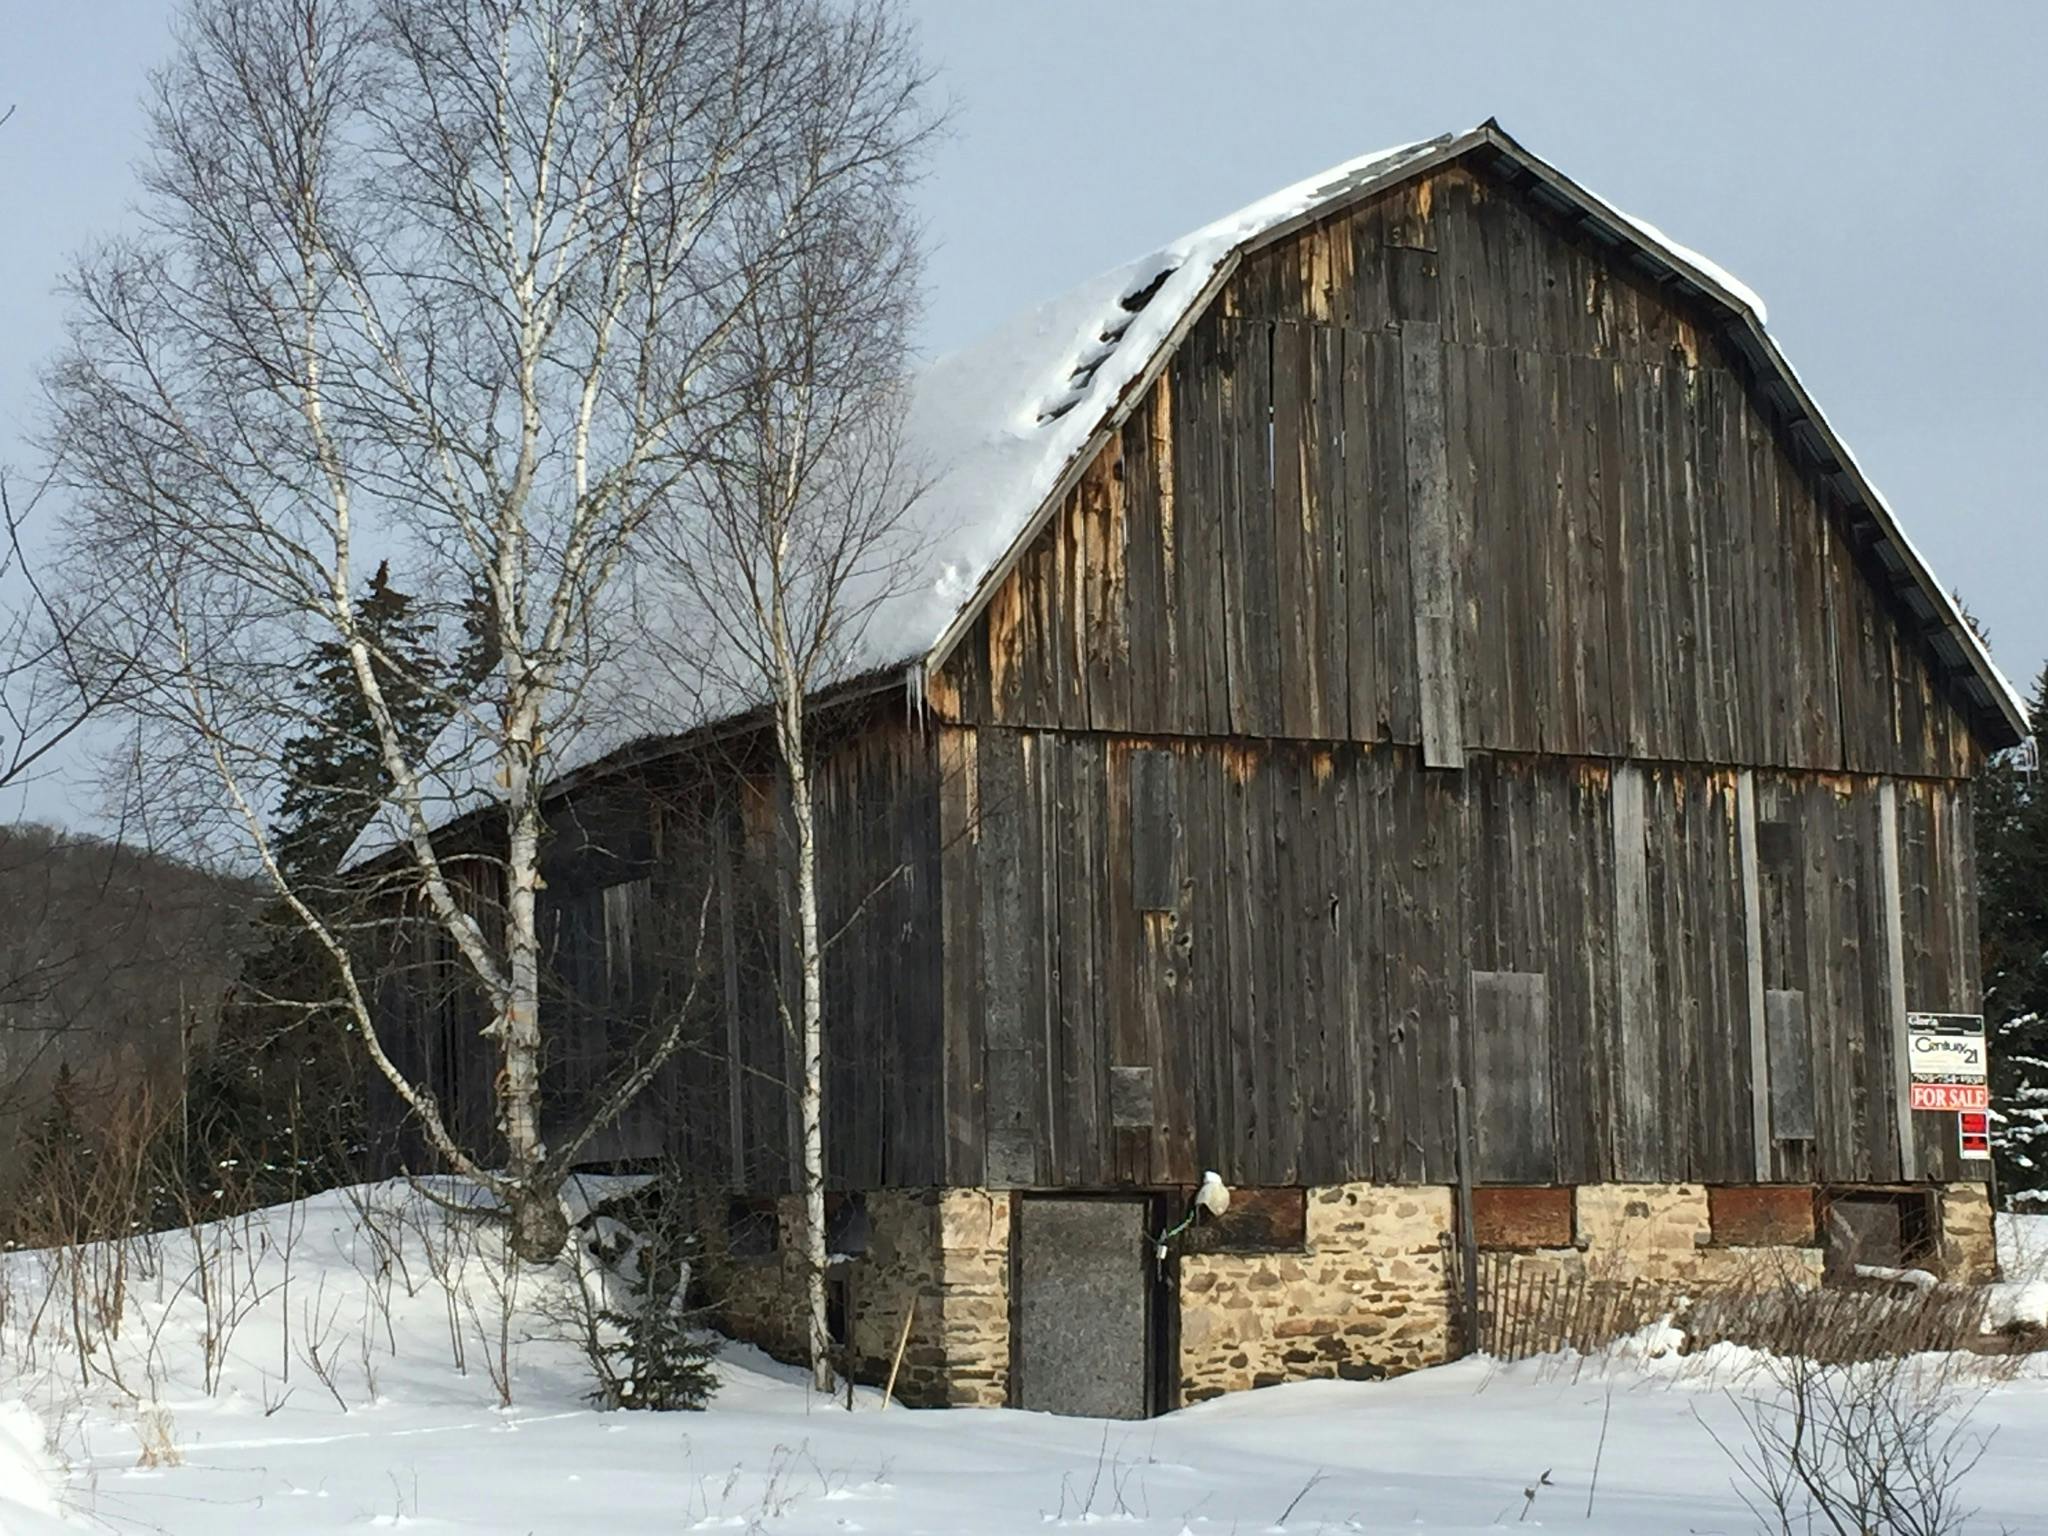 Free stock photo of Old barn. Barn and birches